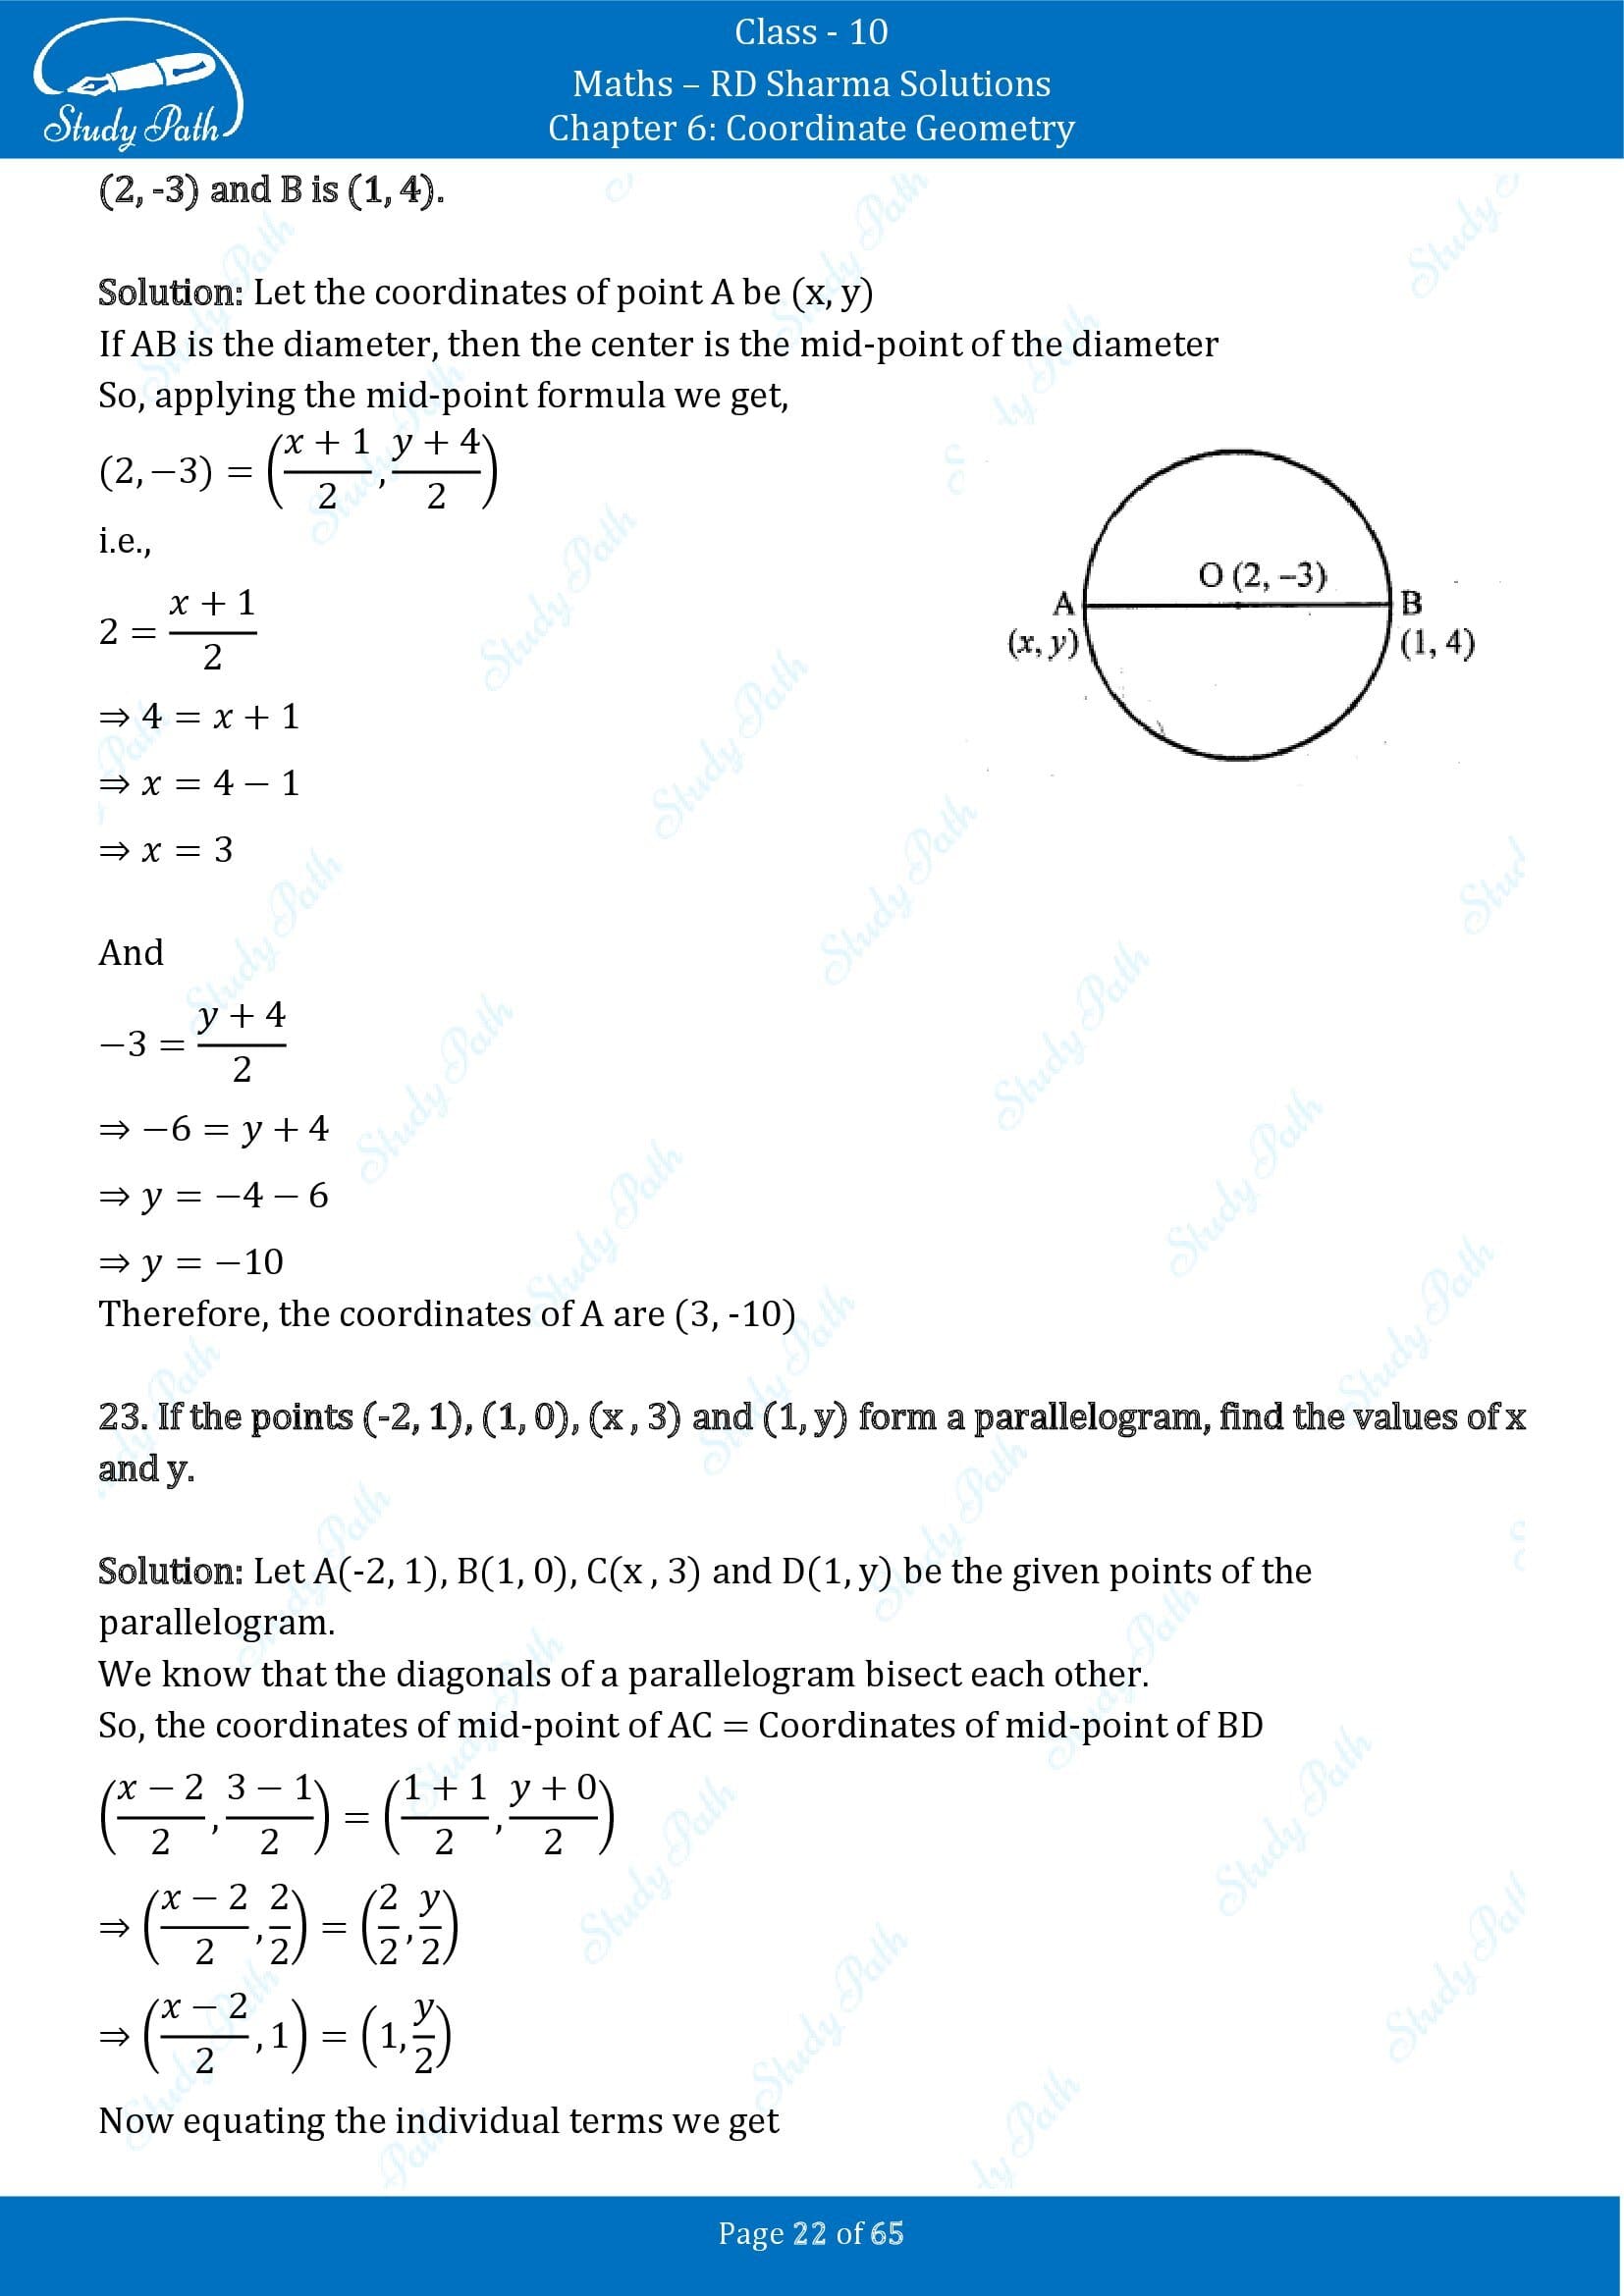 RD Sharma Solutions Class 10 Chapter 6 Coordinate Geometry Exercise 6.3 00022